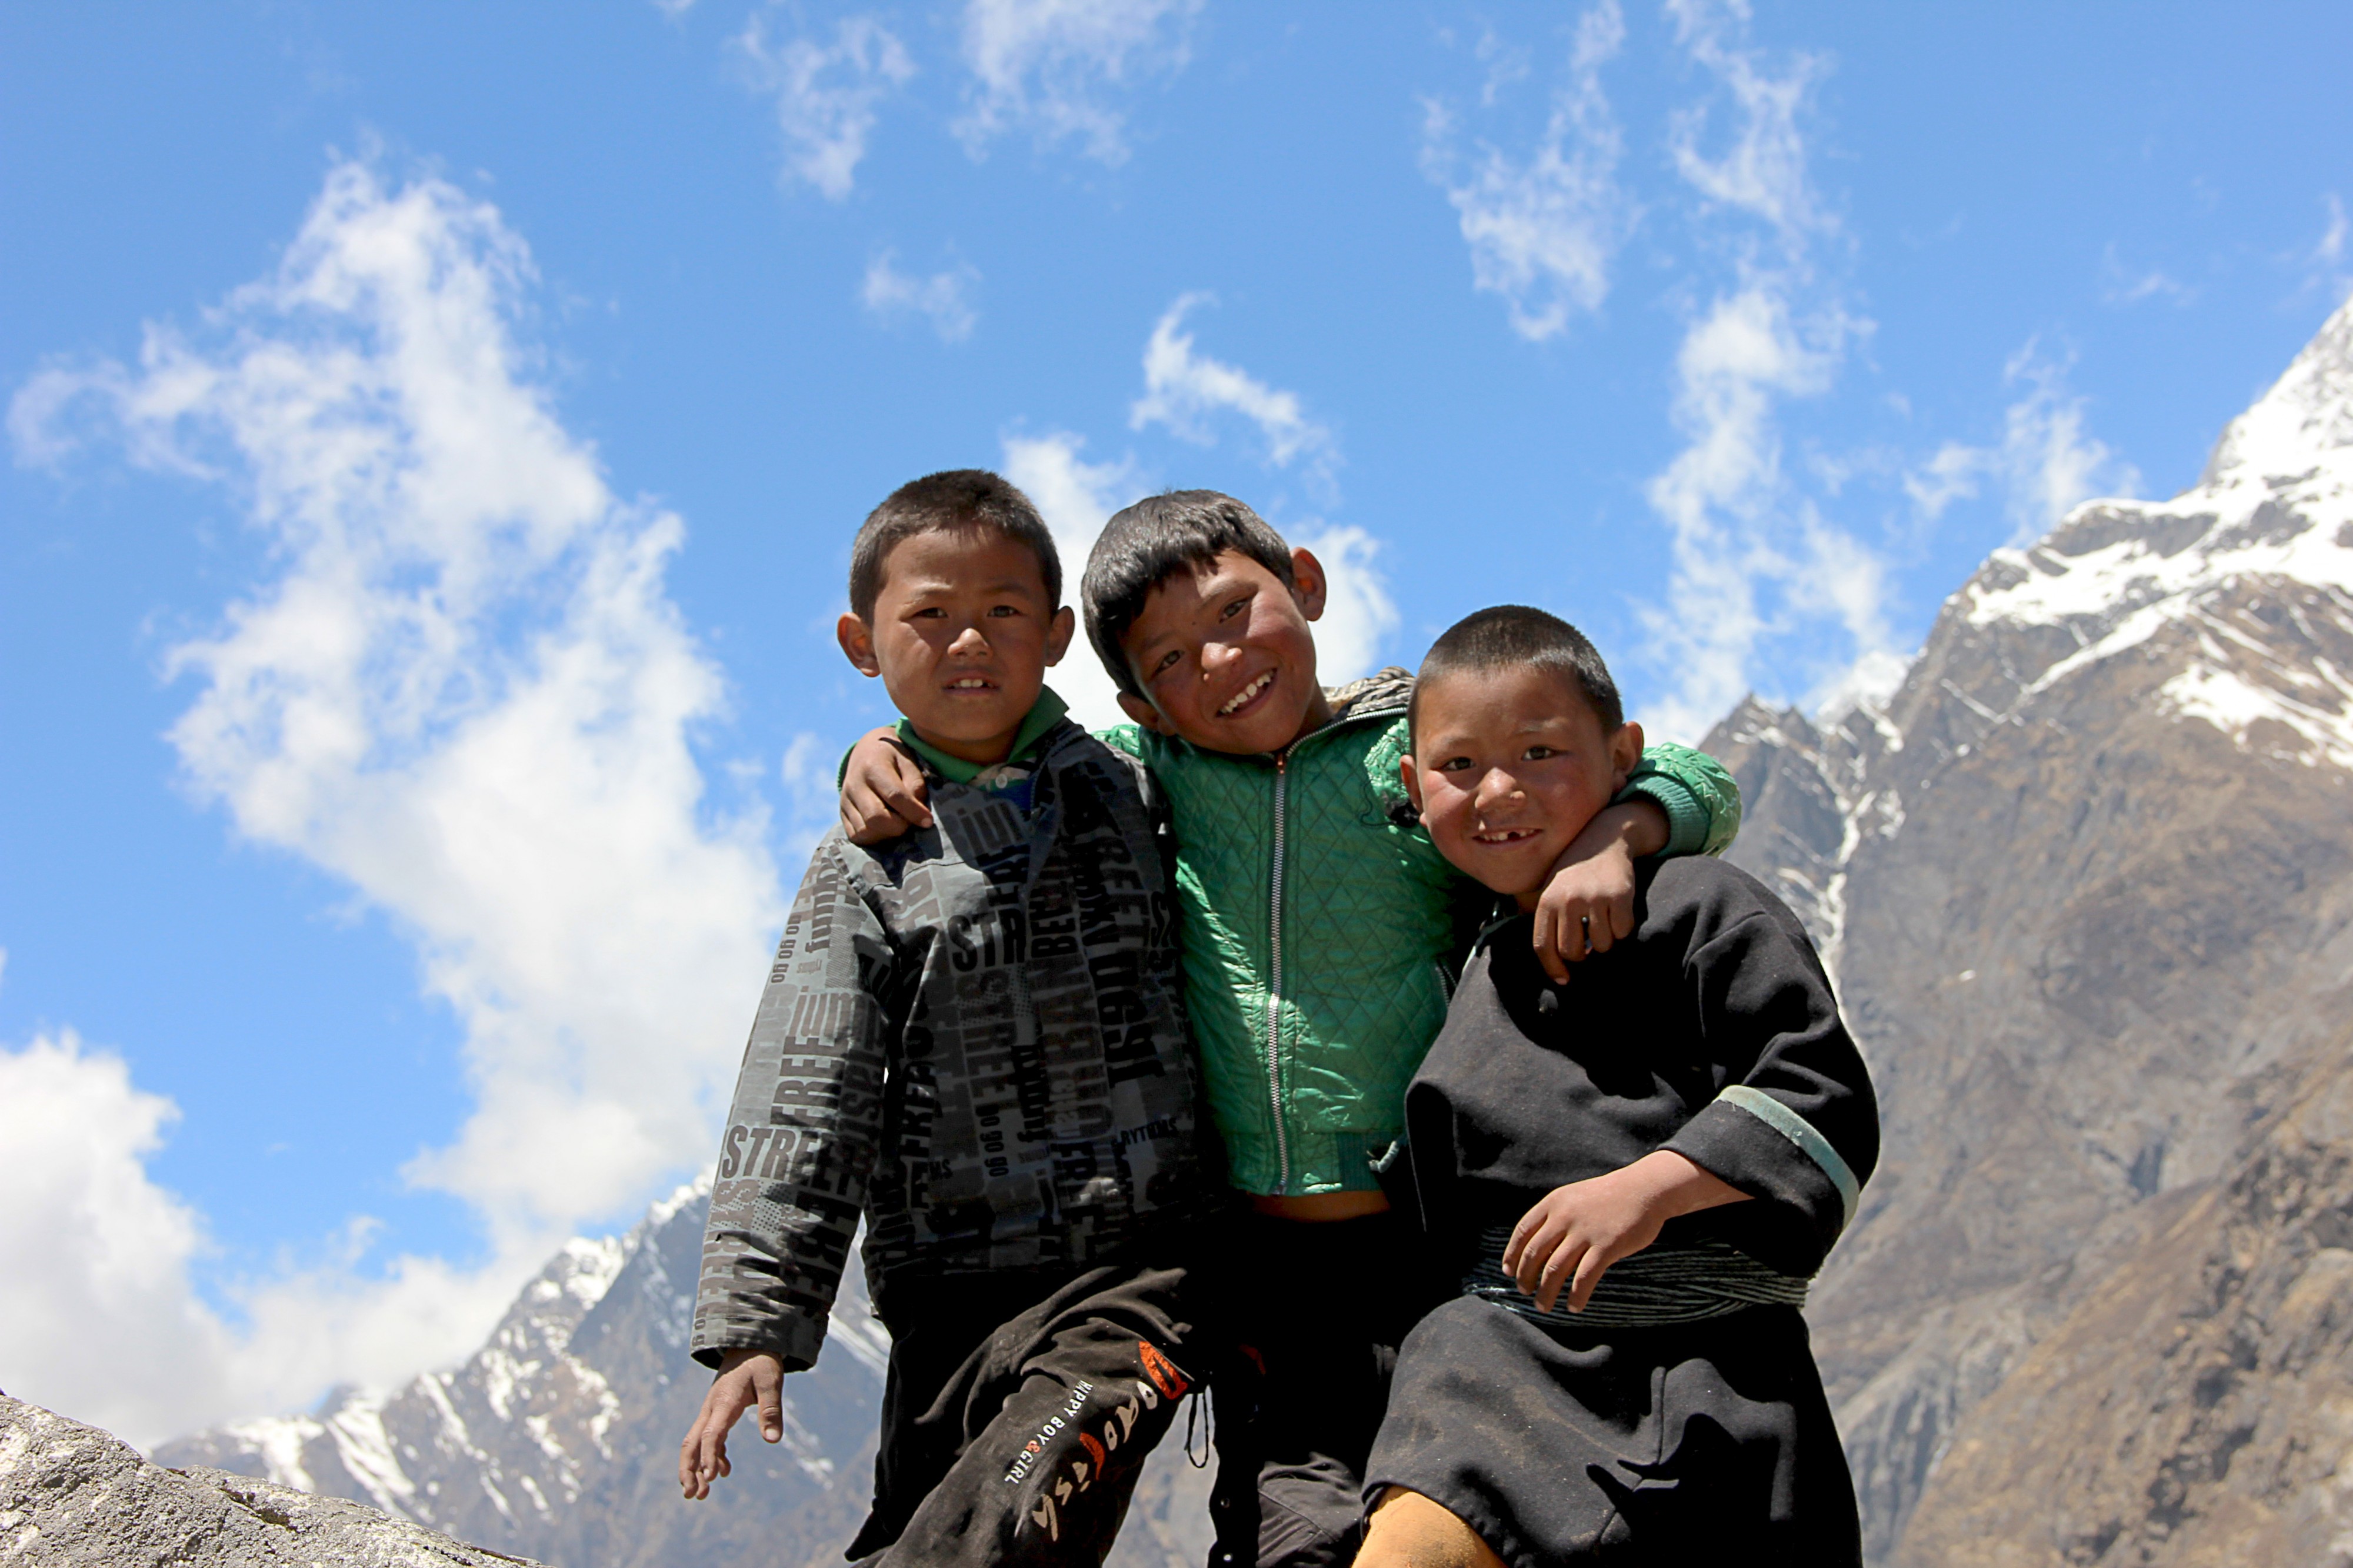 Faces of Nepal - Children of Langtang